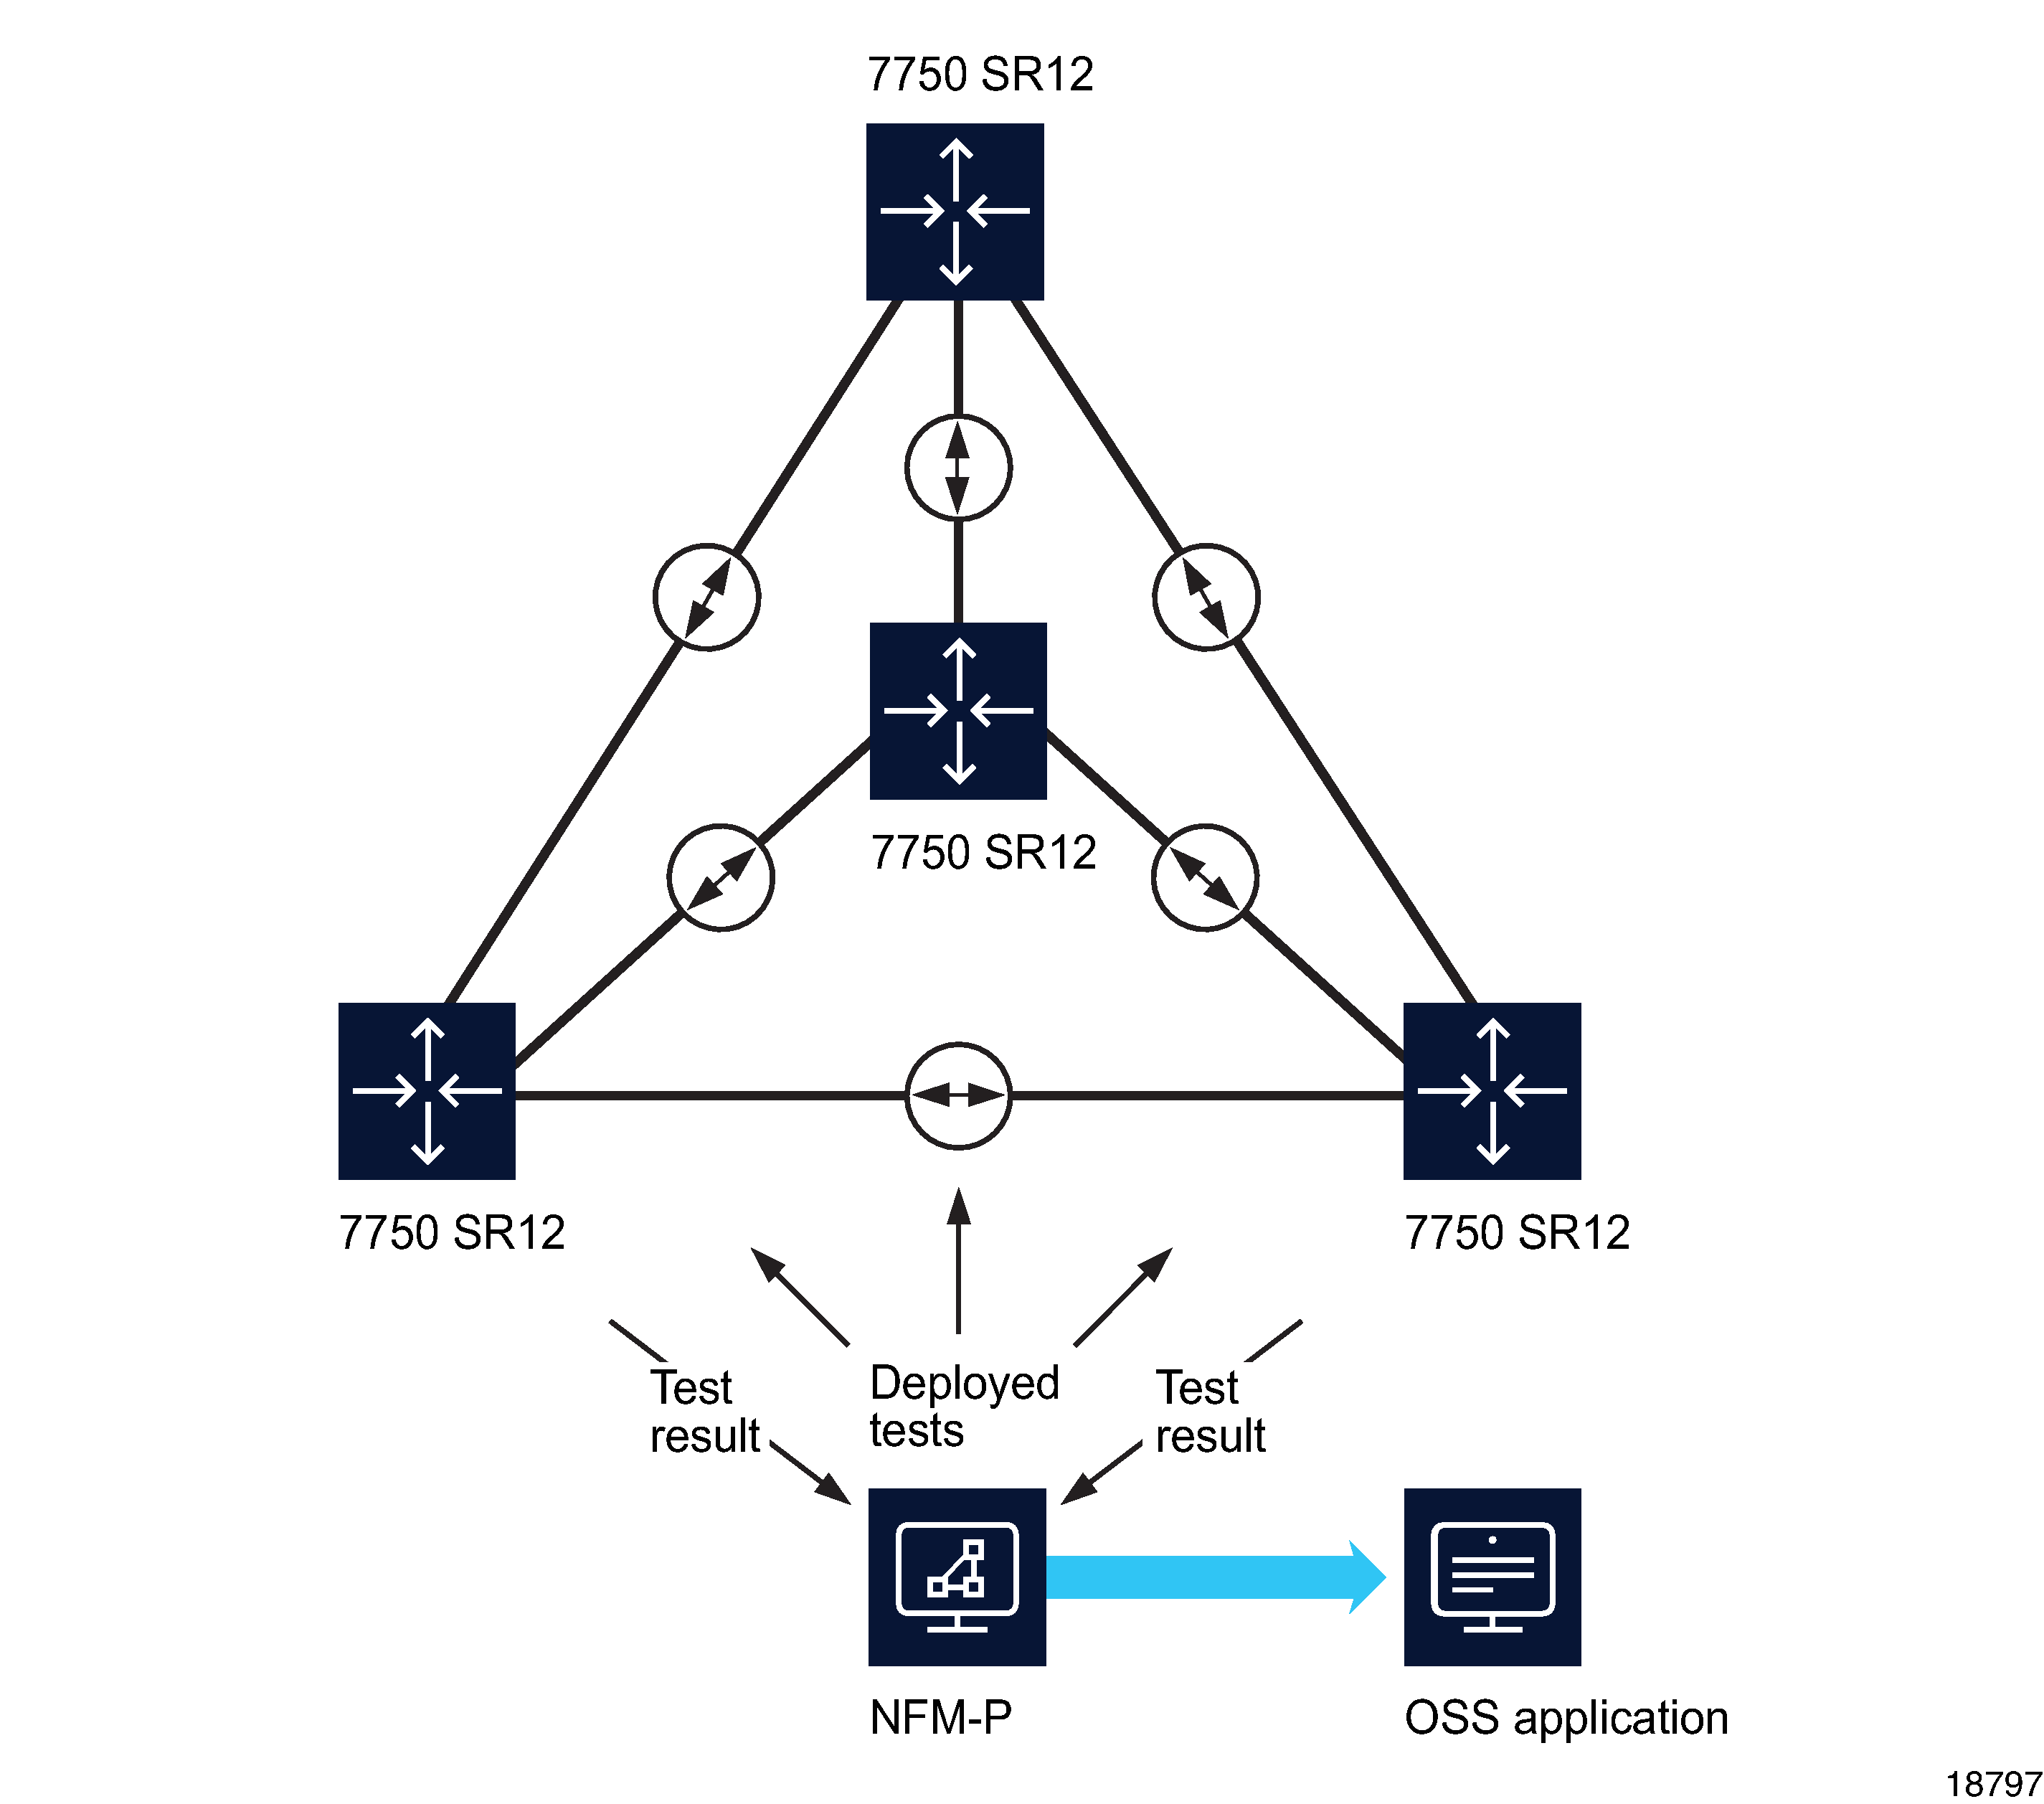 Continual network topology monitoring